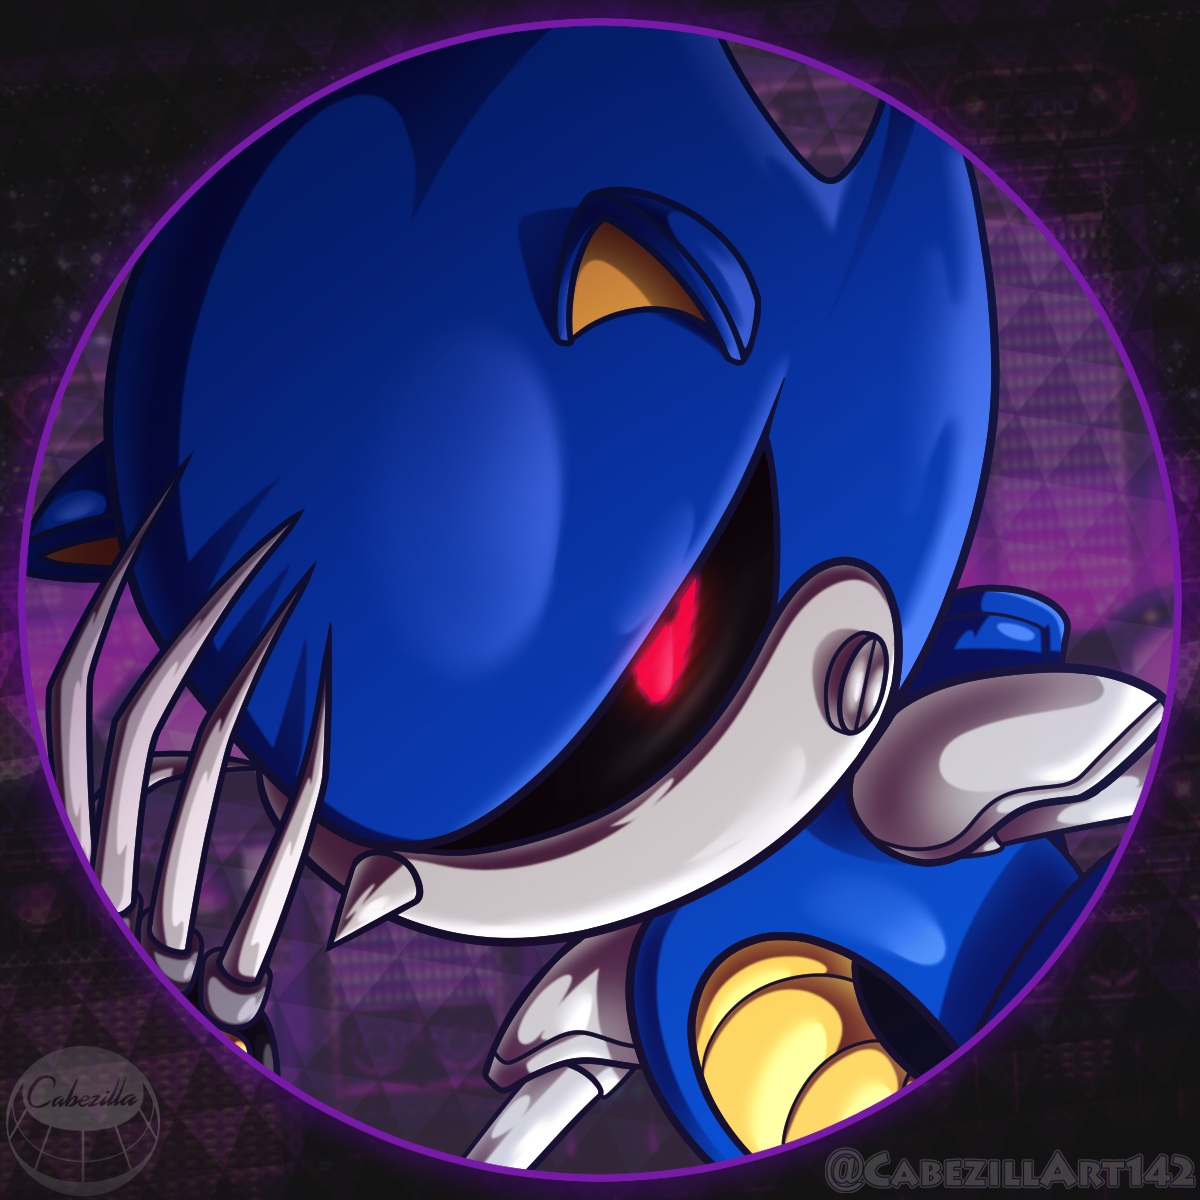 Metal sonic by g2ng2 on DeviantArt